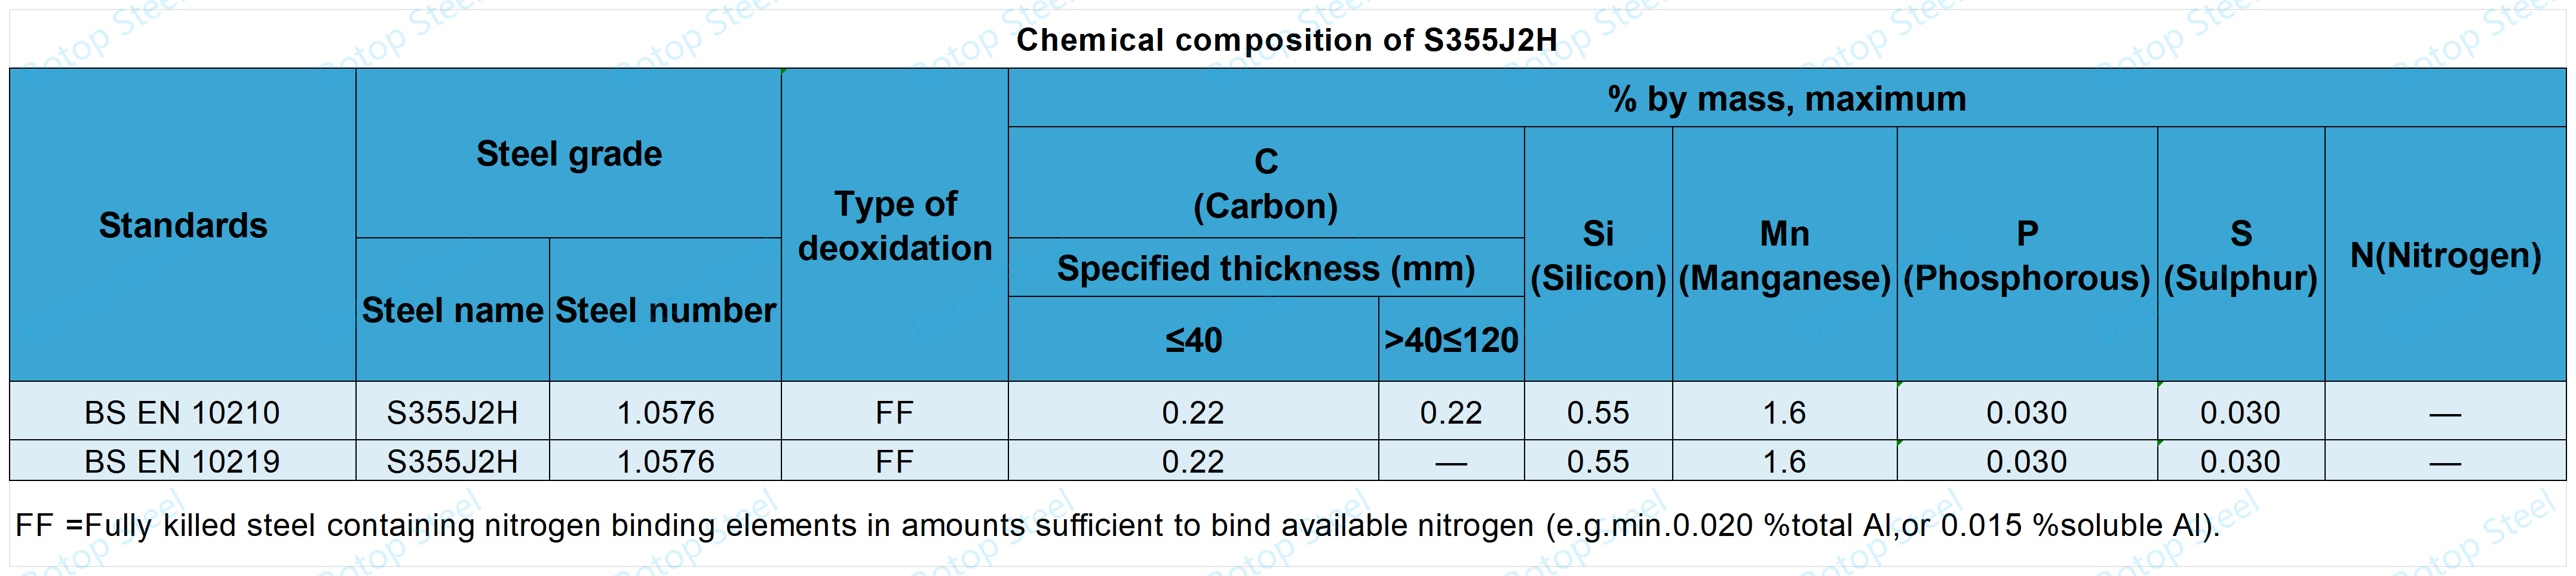 Chemical composition of S355J2H